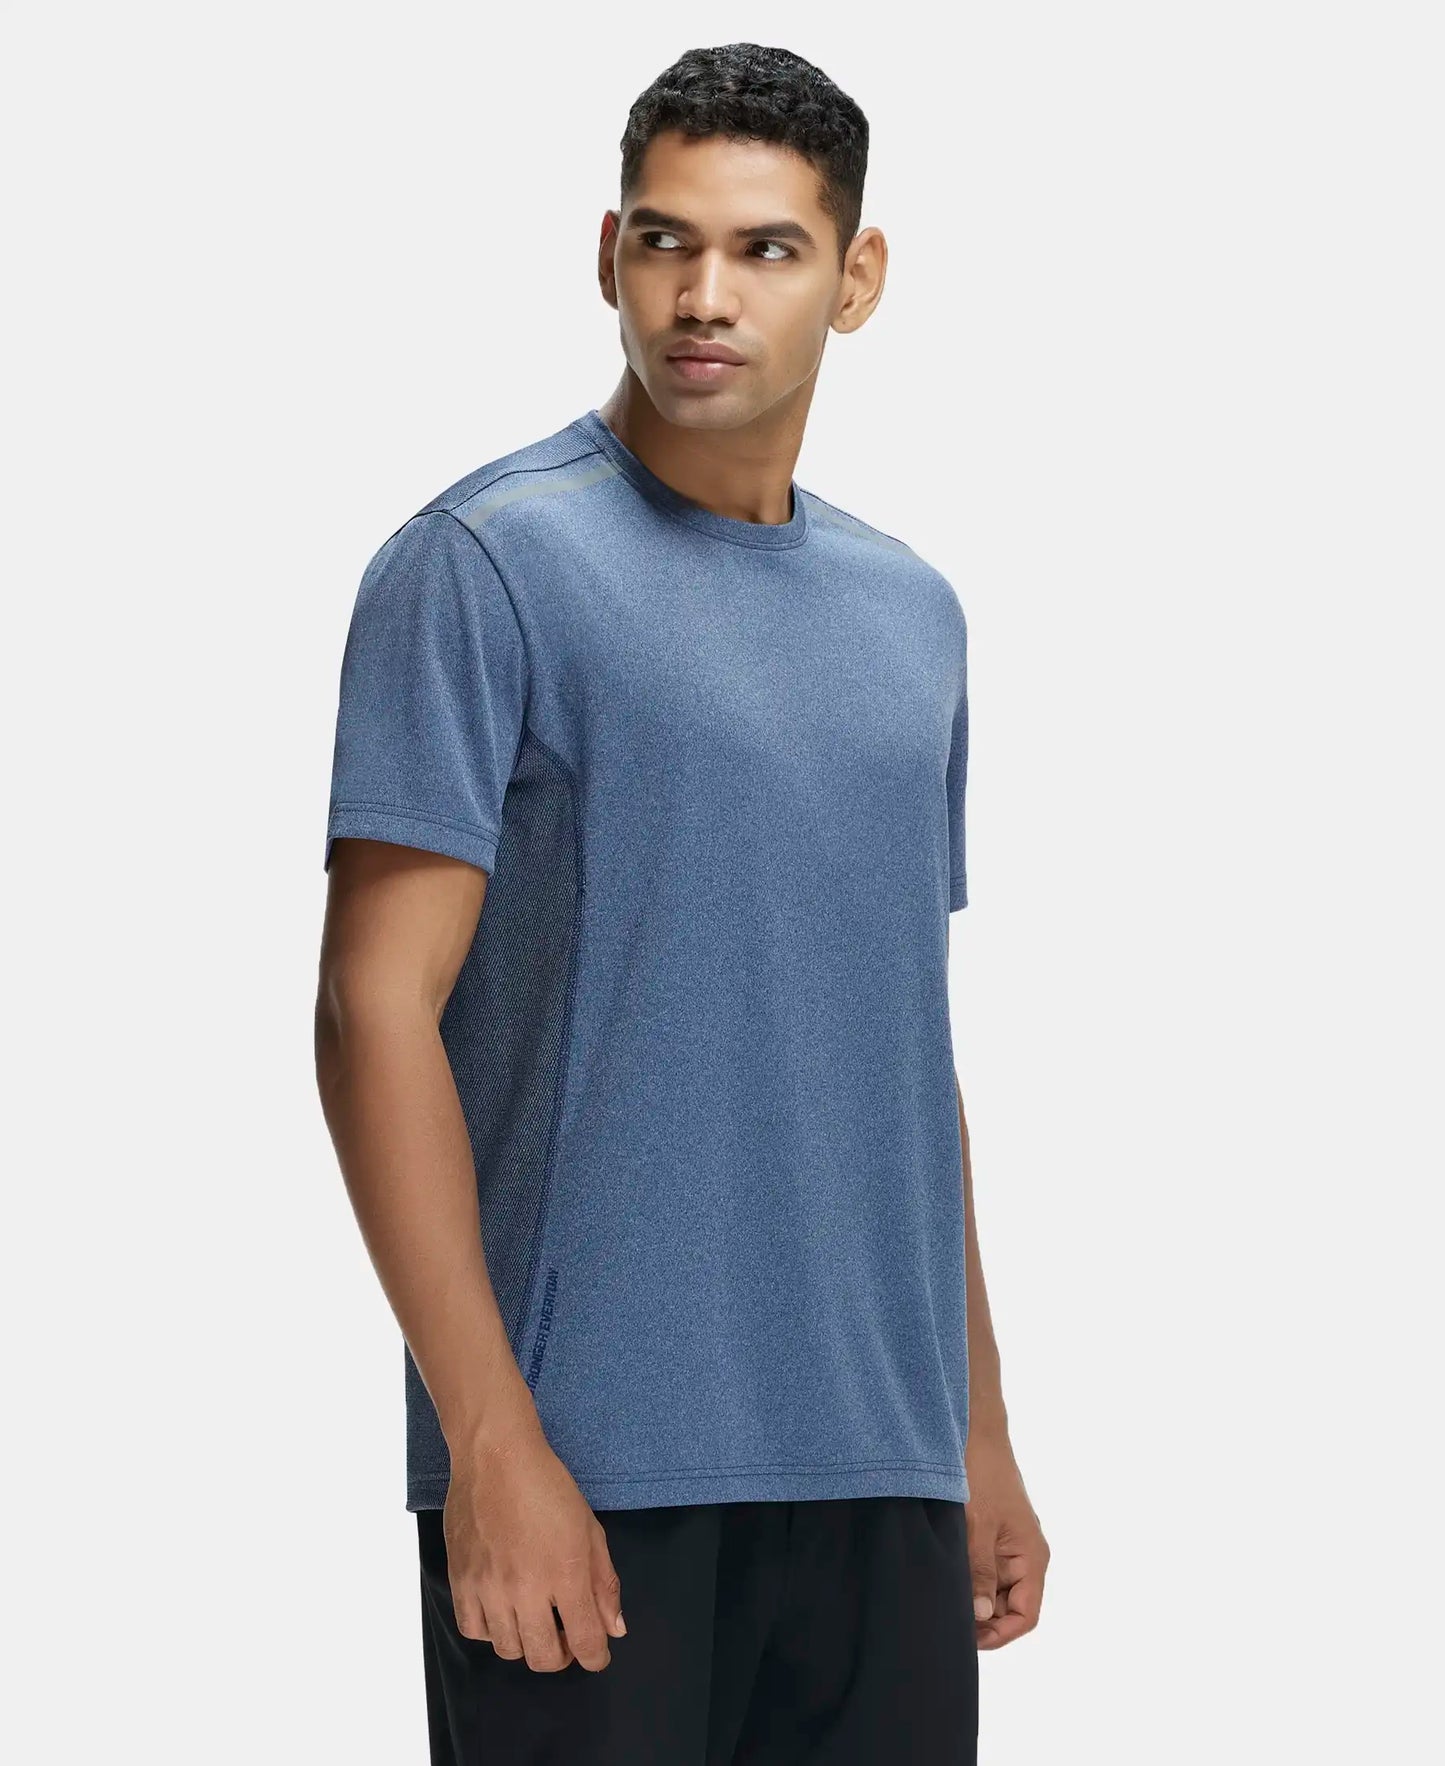 Recycled Microfiber Elastane Stretch Half Sleeve Round Neck T-Shirt with Breathable Mesh - Navy-2